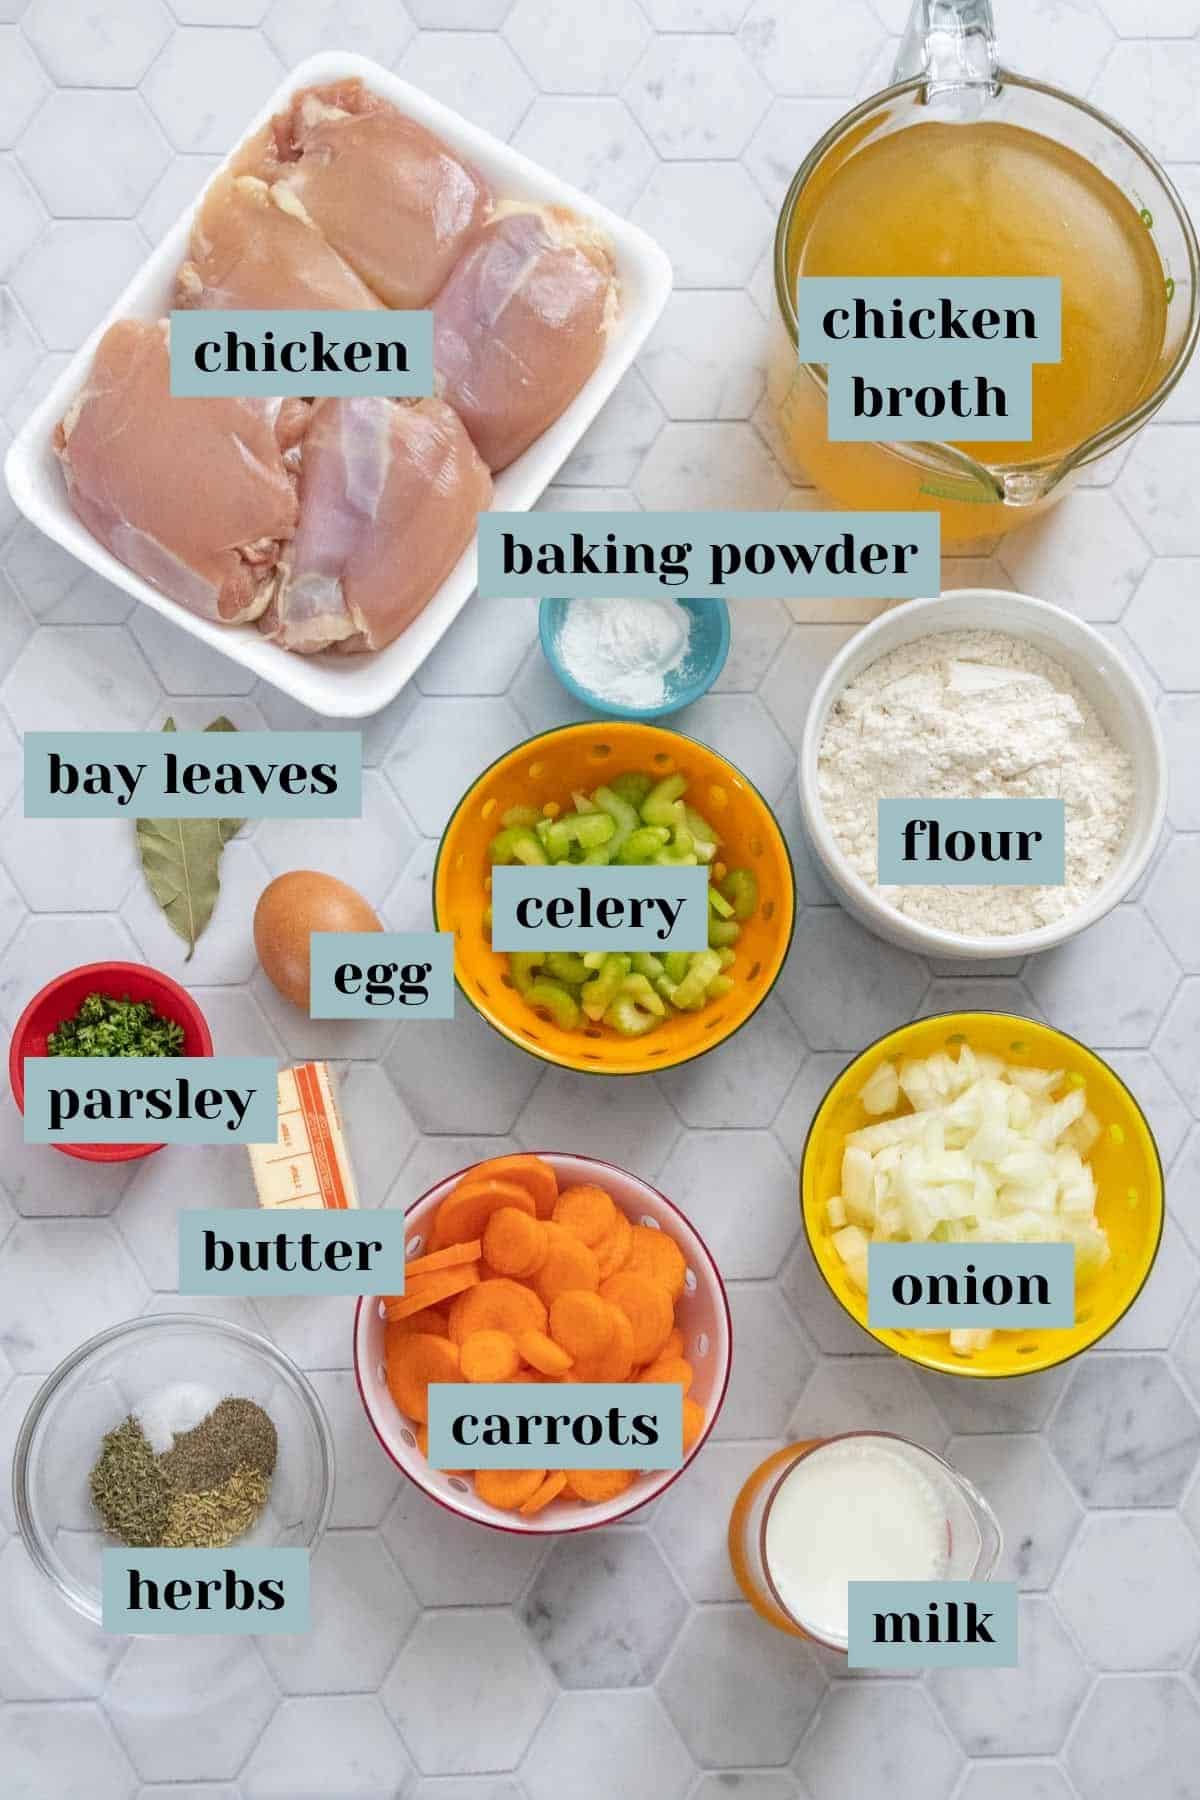 Ingredients for chicken and dumplings on a tile surface with labels.